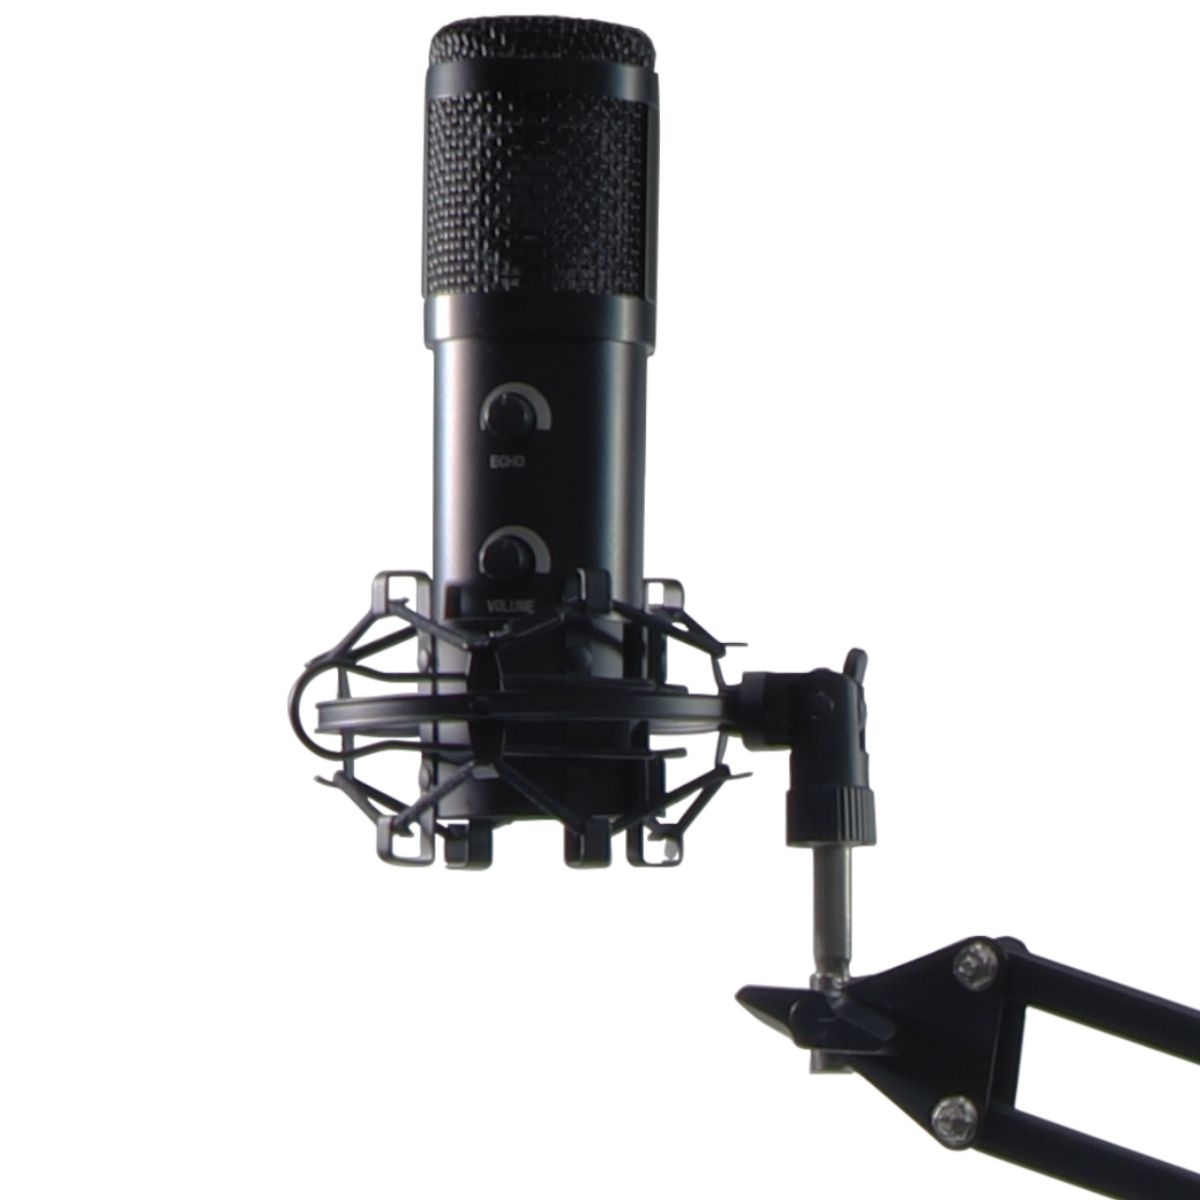 Professional Plug & Play PC Computer Podcast Condenser Microphone - Black